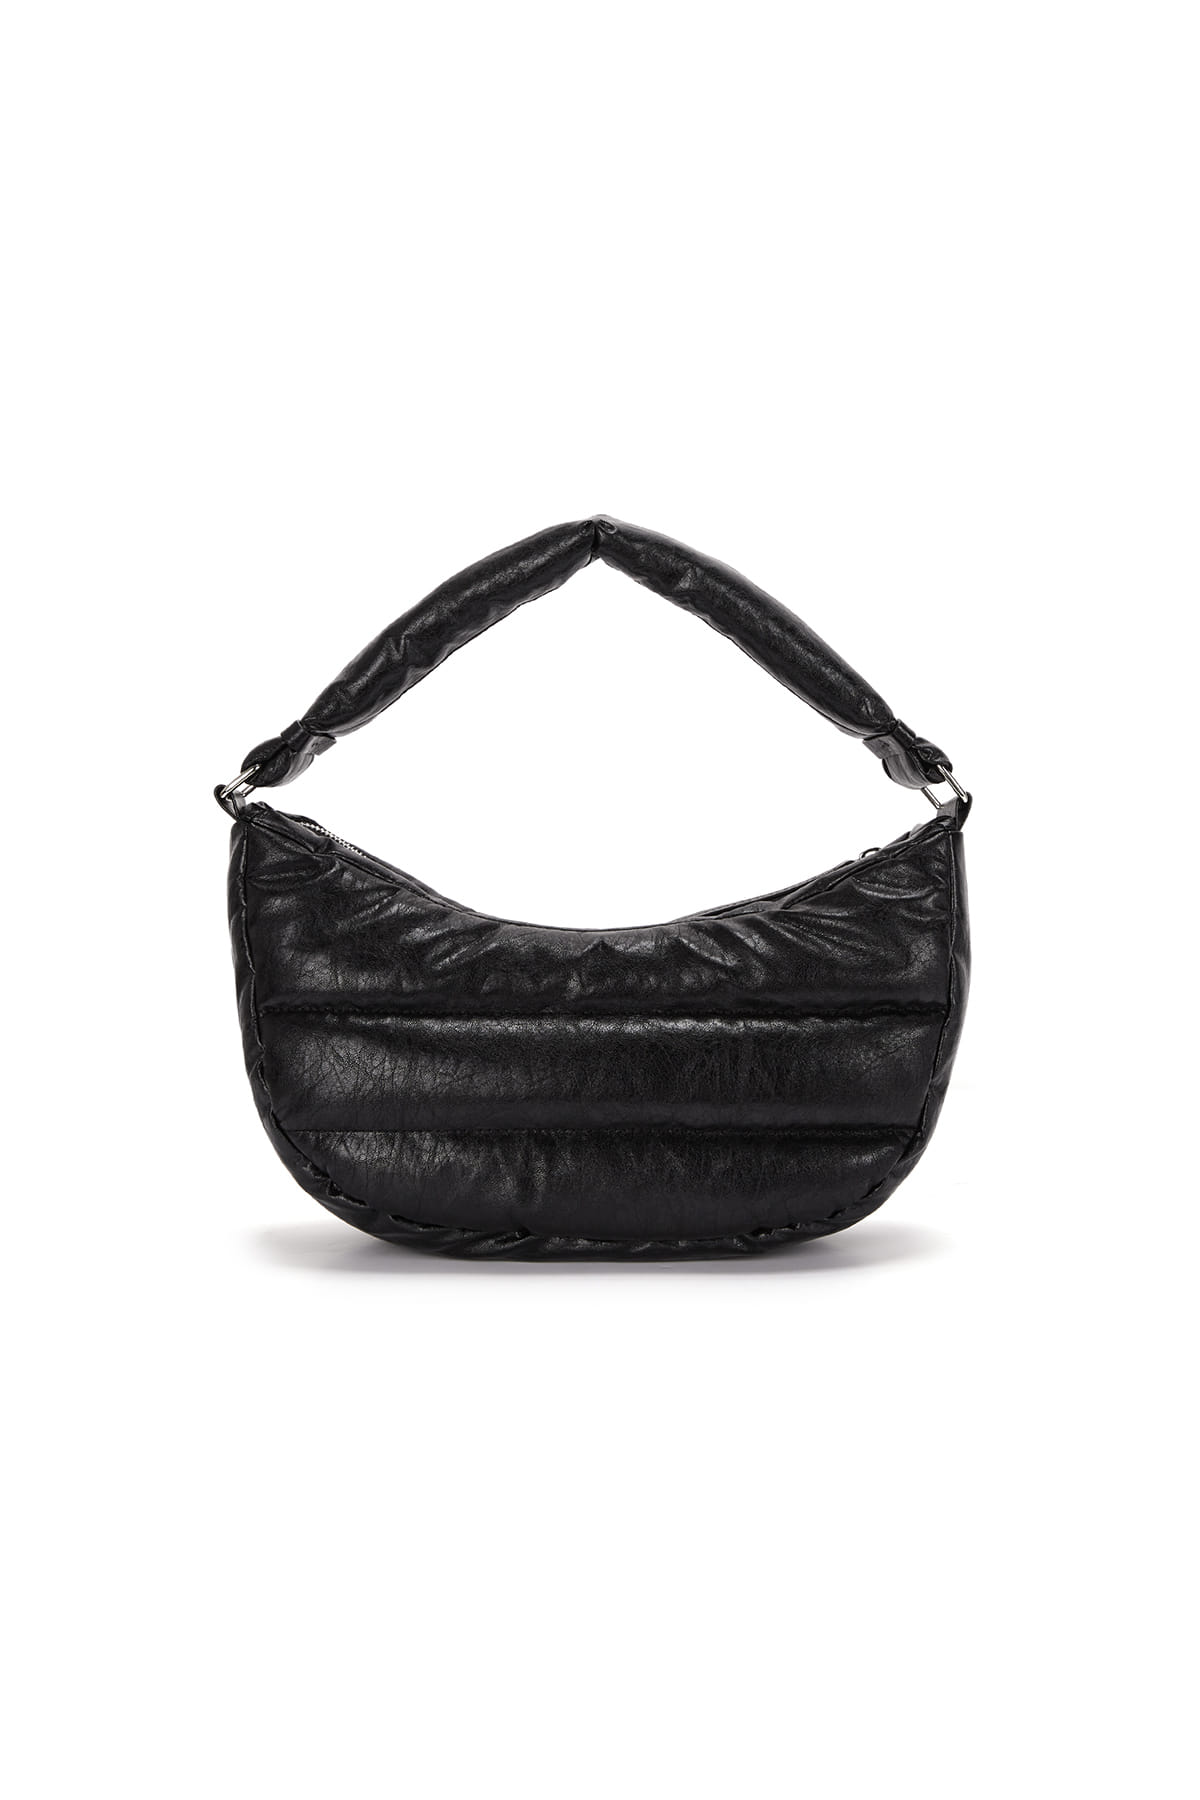 FAUX LEATHER HALF MOON MIDDLE PADDING BAG IN BLACK